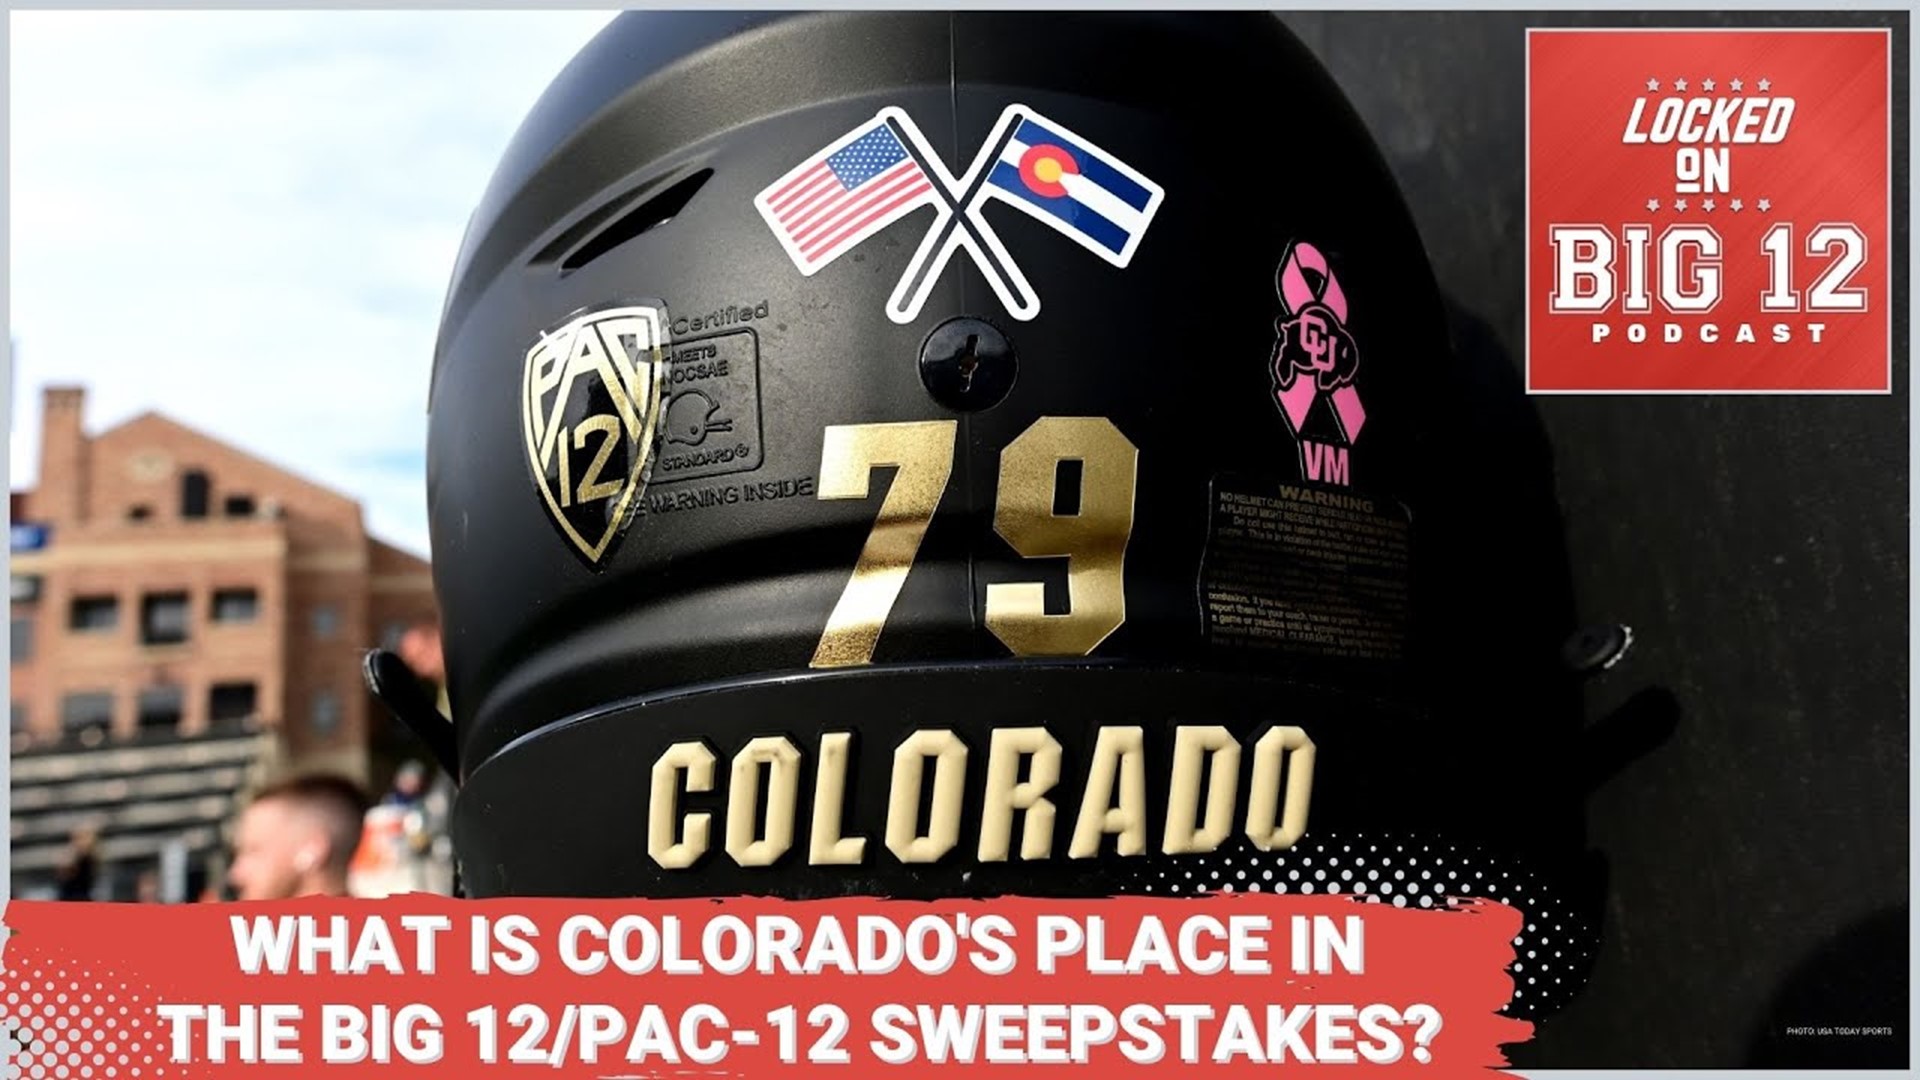 Where Does Colorado Fit In The Pac-12? Big 12 Sweepstakes